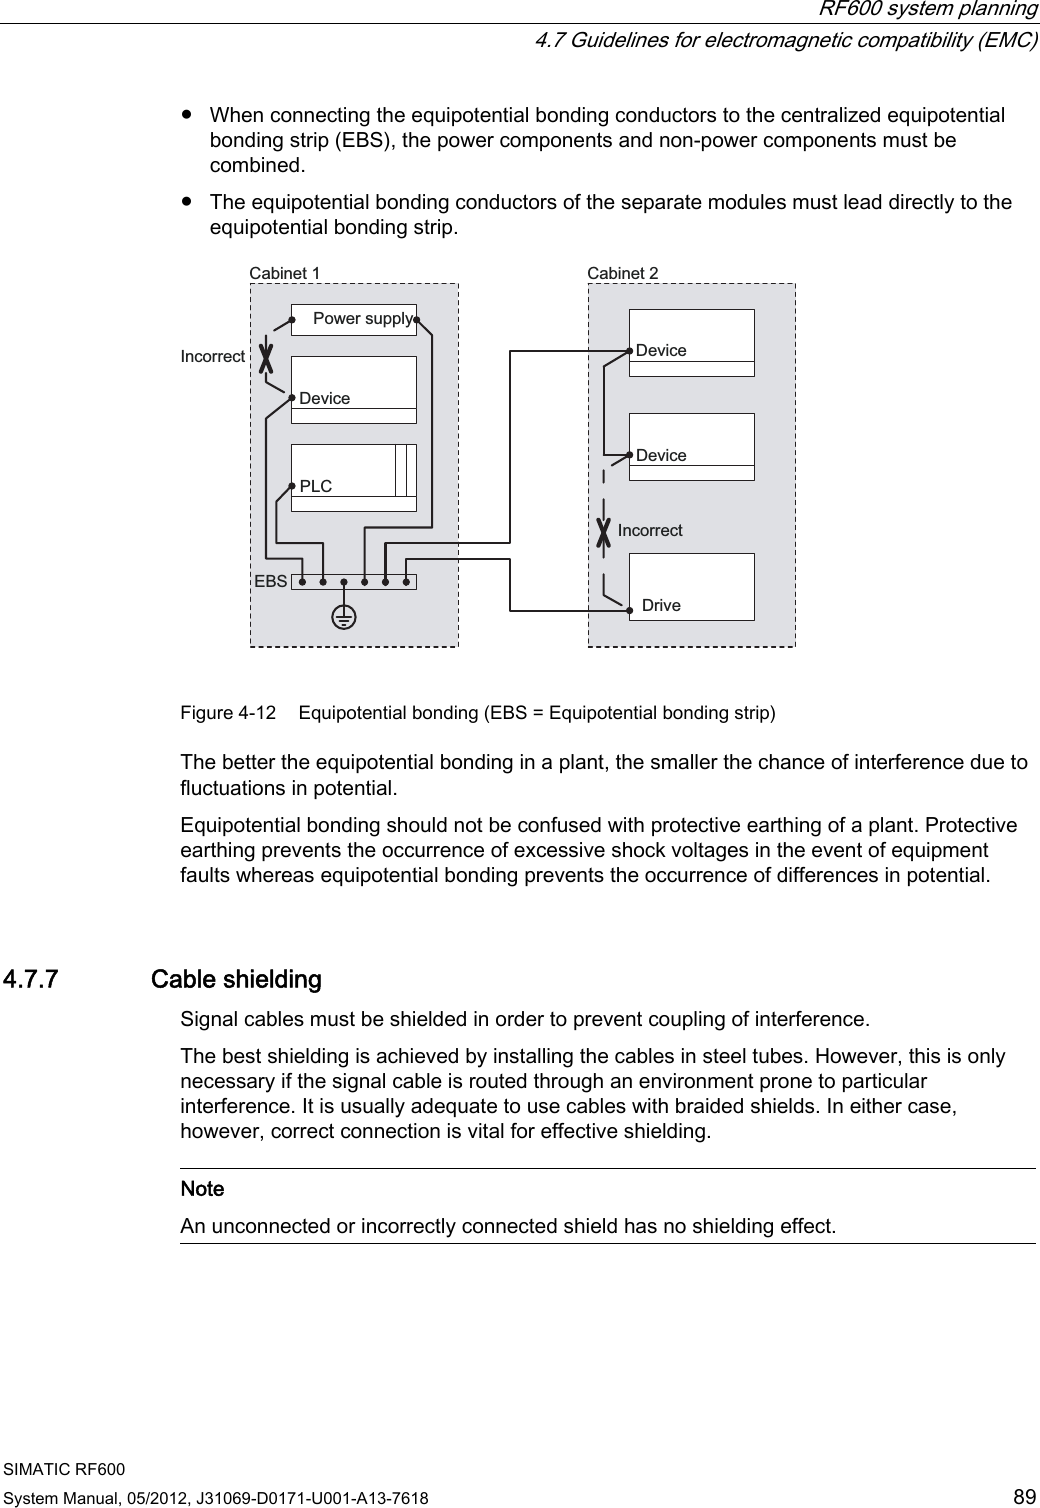  RF600 system planning   4.7 Guidelines for electromagnetic compatibility (EMC) SIMATIC RF600 System Manual, 05/2012, J31069-D0171-U001-A13-7618  89 ●  When connecting the equipotential bonding conductors to the centralized equipotential bonding strip (EBS), the power components and non-power components must be combined. ●  The equipotential bonding conductors of the separate modules must lead directly to the equipotential bonding strip. &amp;DELQHW &amp;DELQHW,QFRUUHFW3RZHUVXSSO\&apos;ULYH&apos;HYLFH3/&amp;(%6&apos;HYLFH&apos;HYLFH,QFRUUHFW Figure 4-12  Equipotential bonding (EBS = Equipotential bonding strip) The better the equipotential bonding in a plant, the smaller the chance of interference due to fluctuations in potential. Equipotential bonding should not be confused with protective earthing of a plant. Protective earthing prevents the occurrence of excessive shock voltages in the event of equipment faults whereas equipotential bonding prevents the occurrence of differences in potential. 4.7.7 Cable shielding Signal cables must be shielded in order to prevent coupling of interference. The best shielding is achieved by installing the cables in steel tubes. However, this is only necessary if the signal cable is routed through an environment prone to particular interference. It is usually adequate to use cables with braided shields. In either case, however, correct connection is vital for effective shielding.    Note An unconnected or incorrectly connected shield has no shielding effect.  